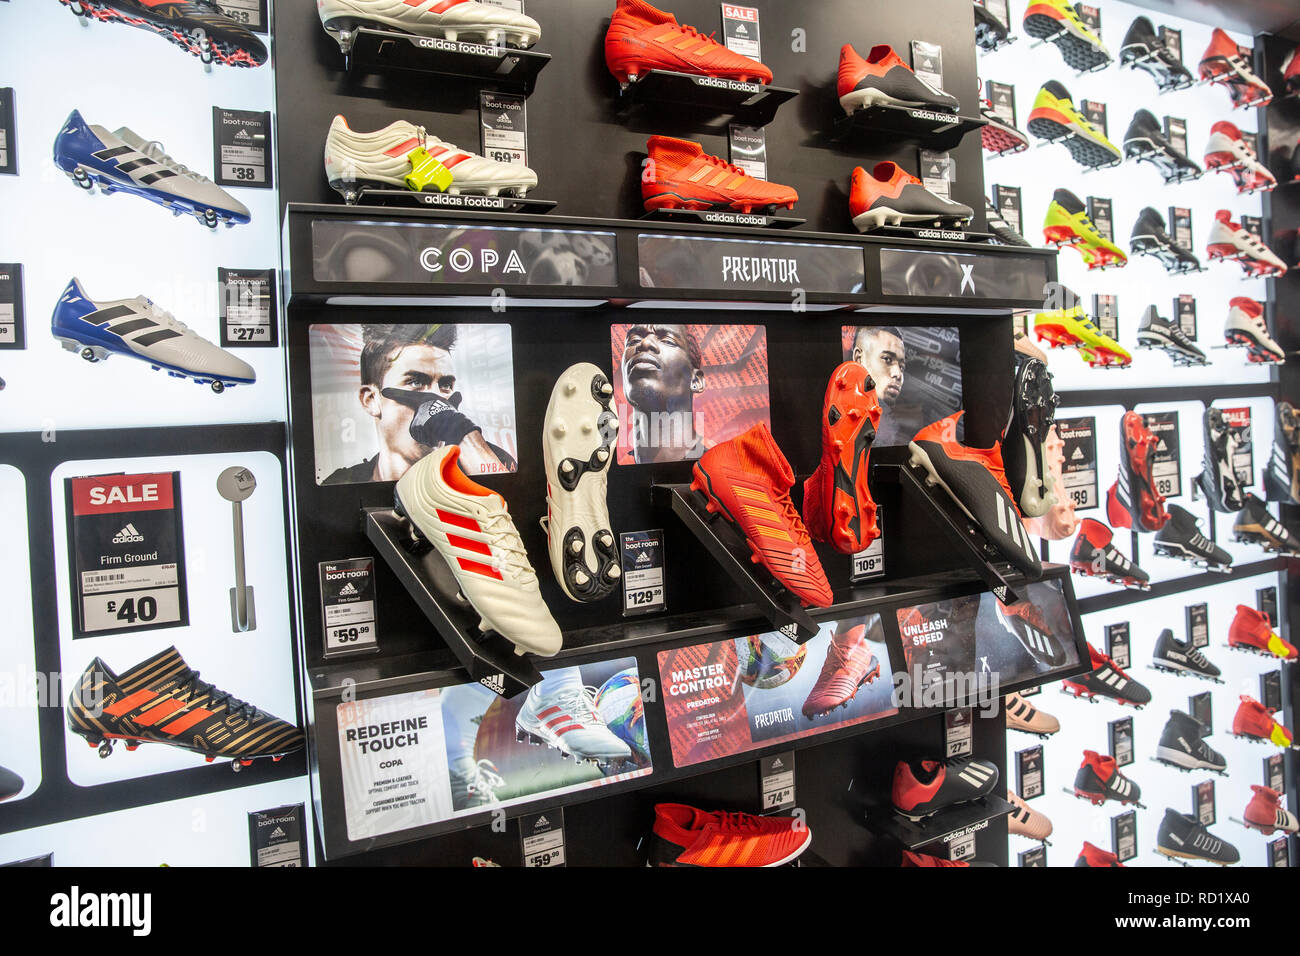 Adidas predator football soccer boots on sale in a UK sports shop,England Stock Photo